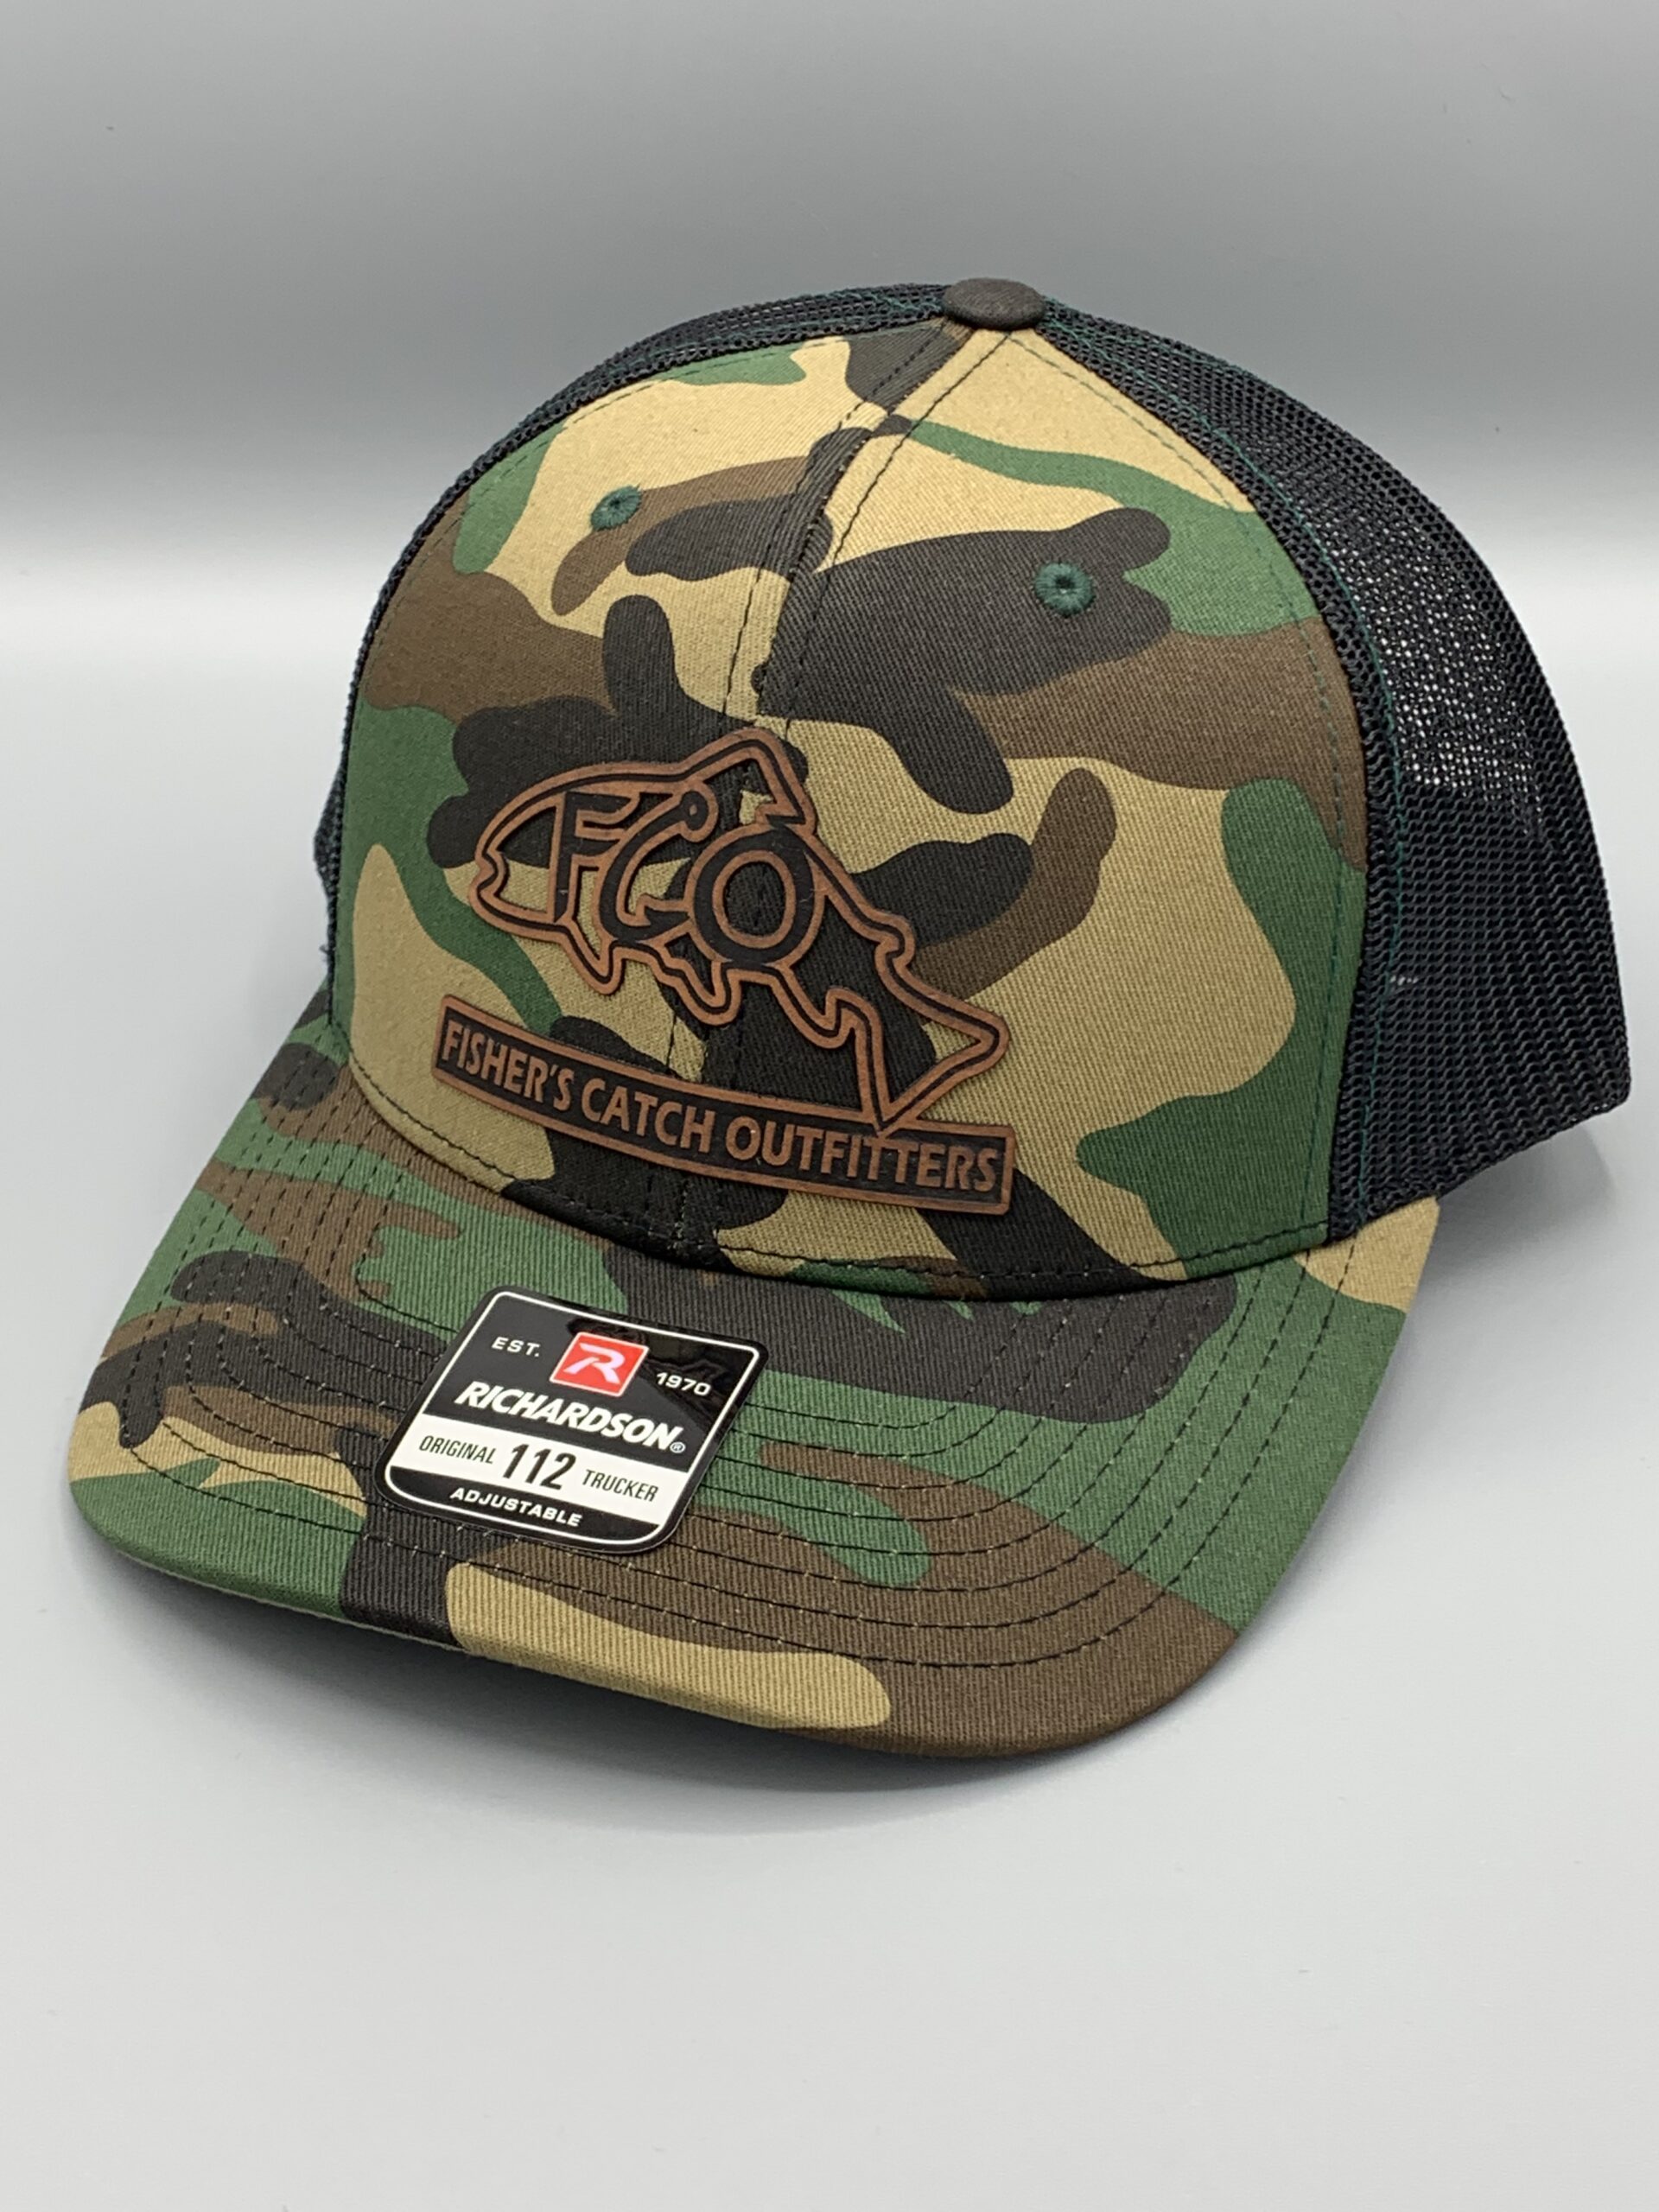 https://fisherscatchoutfitters.com/wp-content/uploads/2022/07/7.24.22-Camo-Hat-scaled.jpg